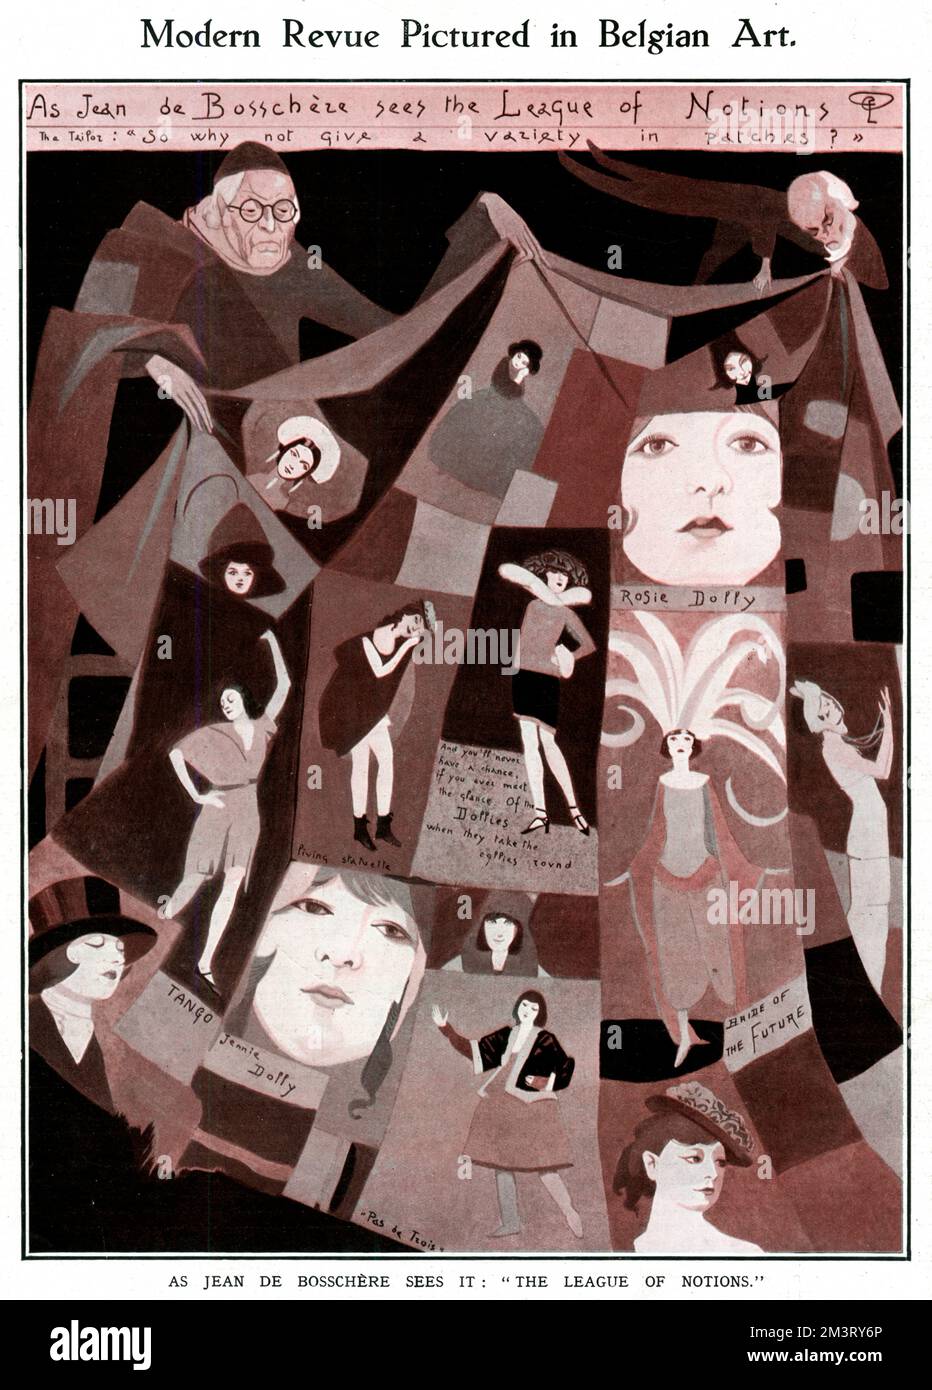 Jean de Bosschere's interpretation of the opening scene of the &quot;League of Notions&quot;, a poppular revue in London. Bosschere was a famous Belgian artist and writer.     Date: 1921 Stock Photo